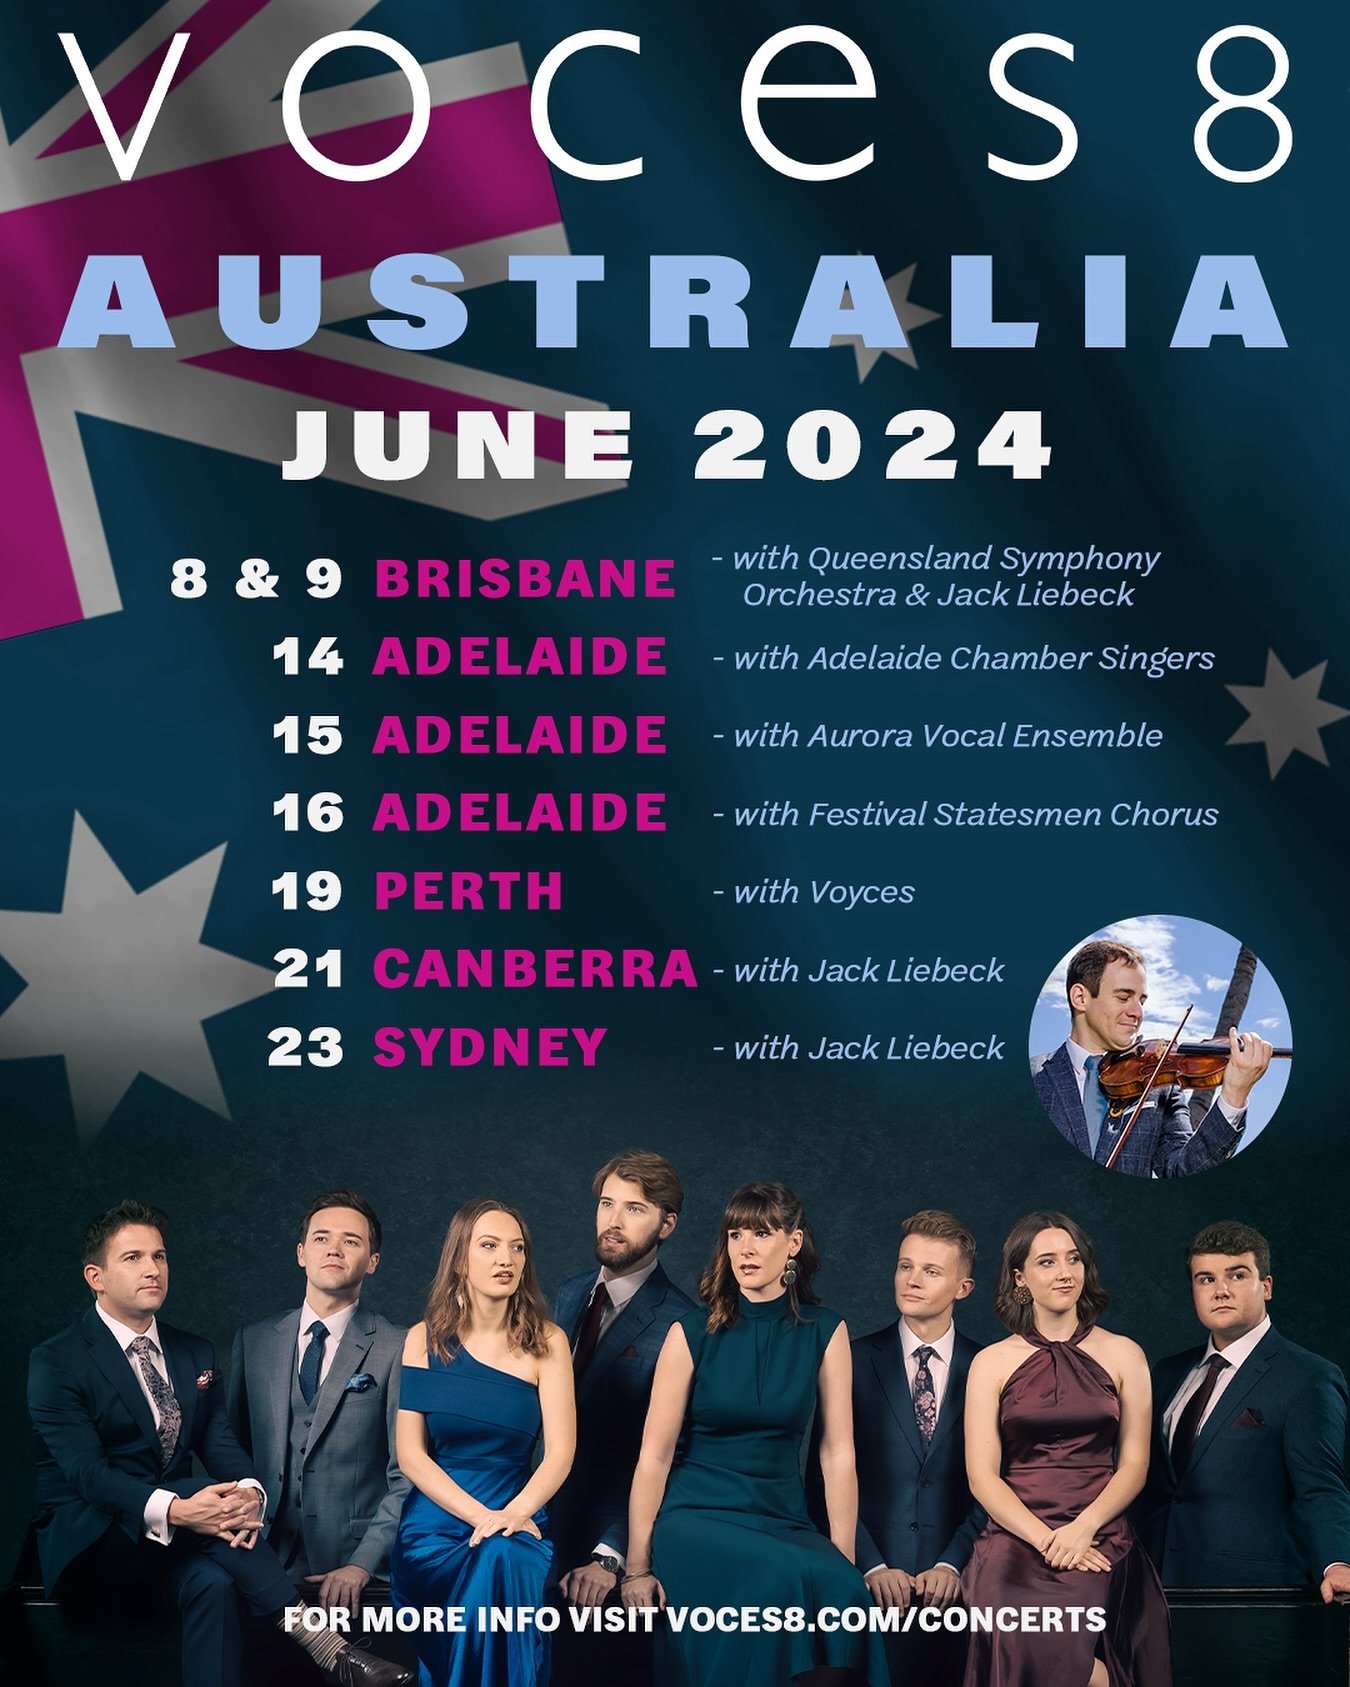 We can&rsquo;t wait to be back in Australia in June, visiting Brisbane, Adelaide, Perth, Canberra, and Sydney!

&bull;&bull;&bull;&bull;&bull;&bull;&bull;&bull;&bull;

#voces8ontour @jackliebeck #lostbirds #choral #classicalmusic #singing #australiat